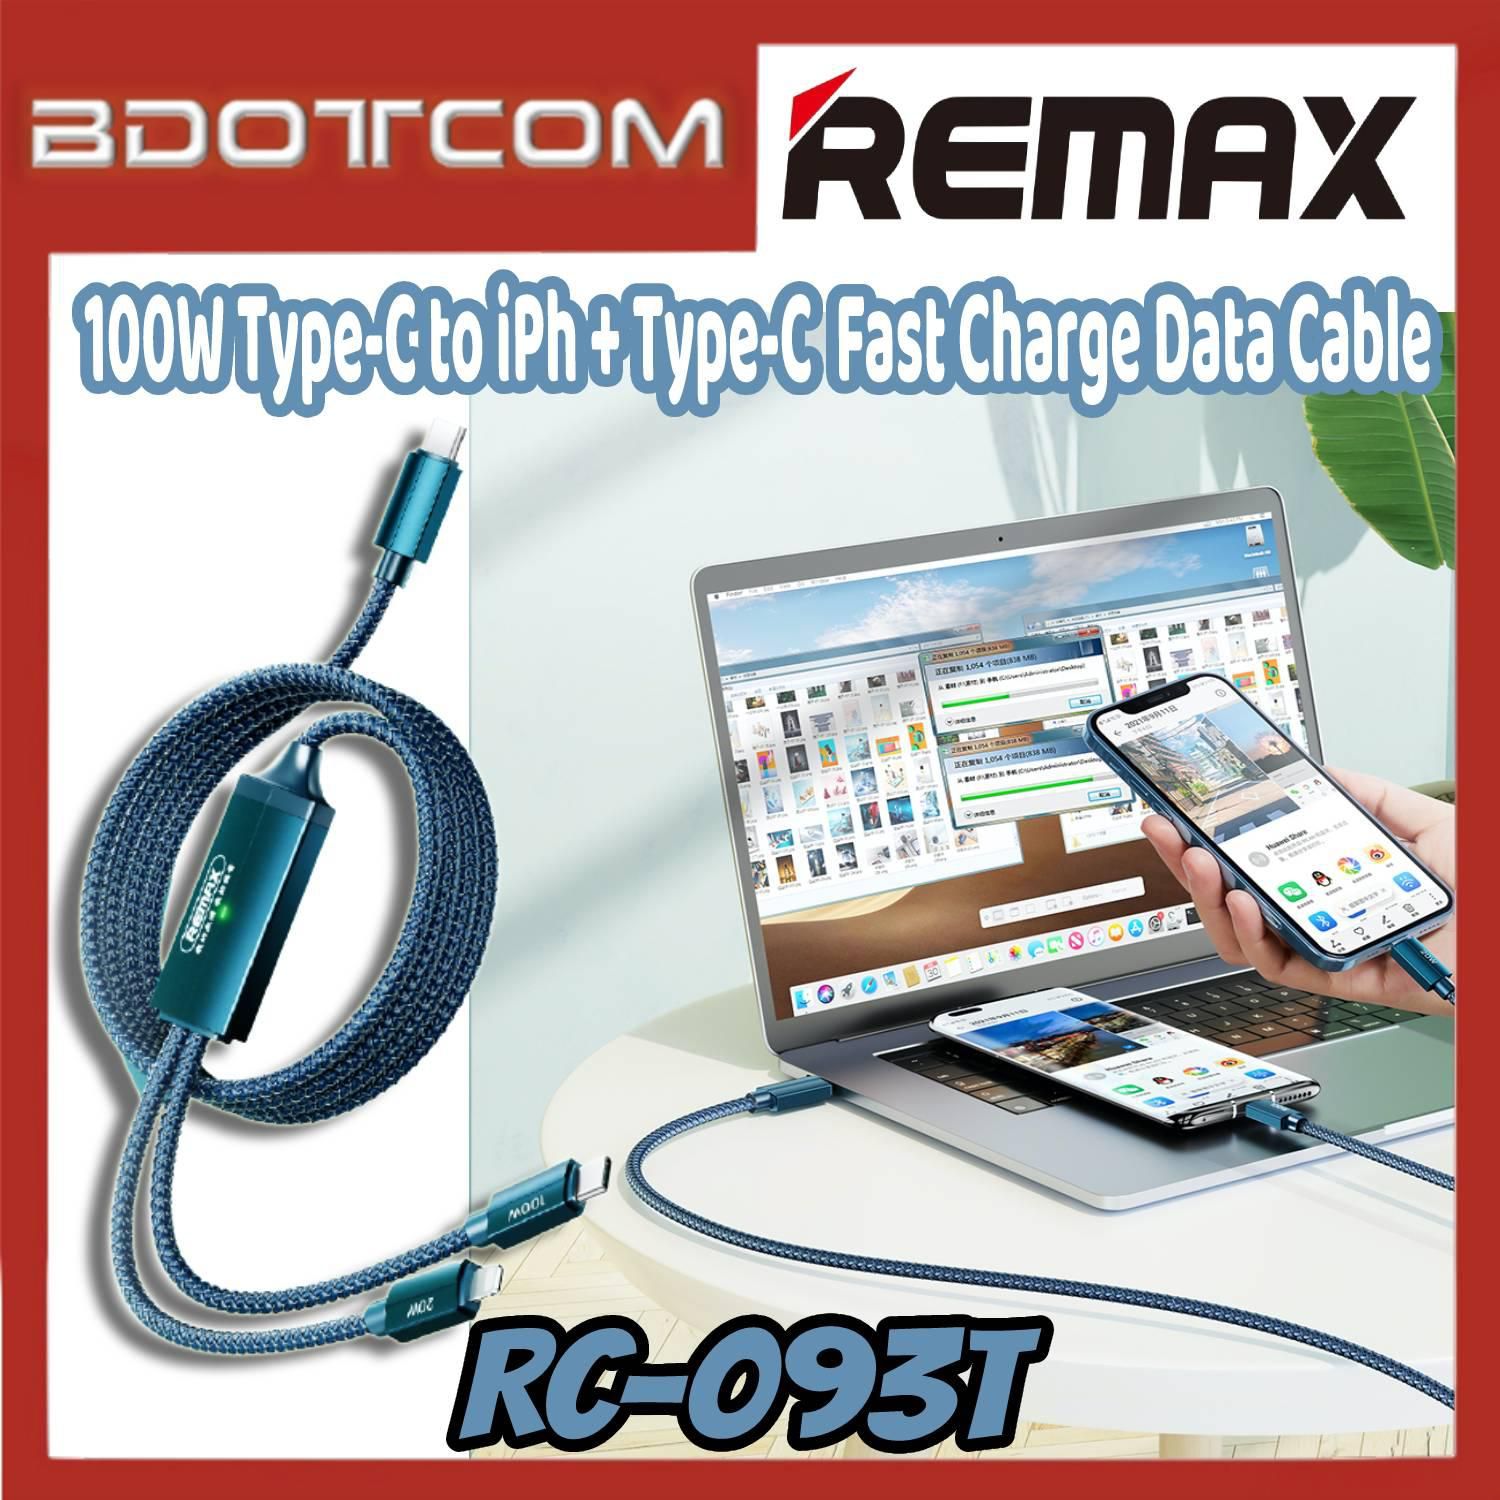 Remax RC-093T Kerolla Series 2 in 1 100W Type-C to iPh + Type-C Data Cable